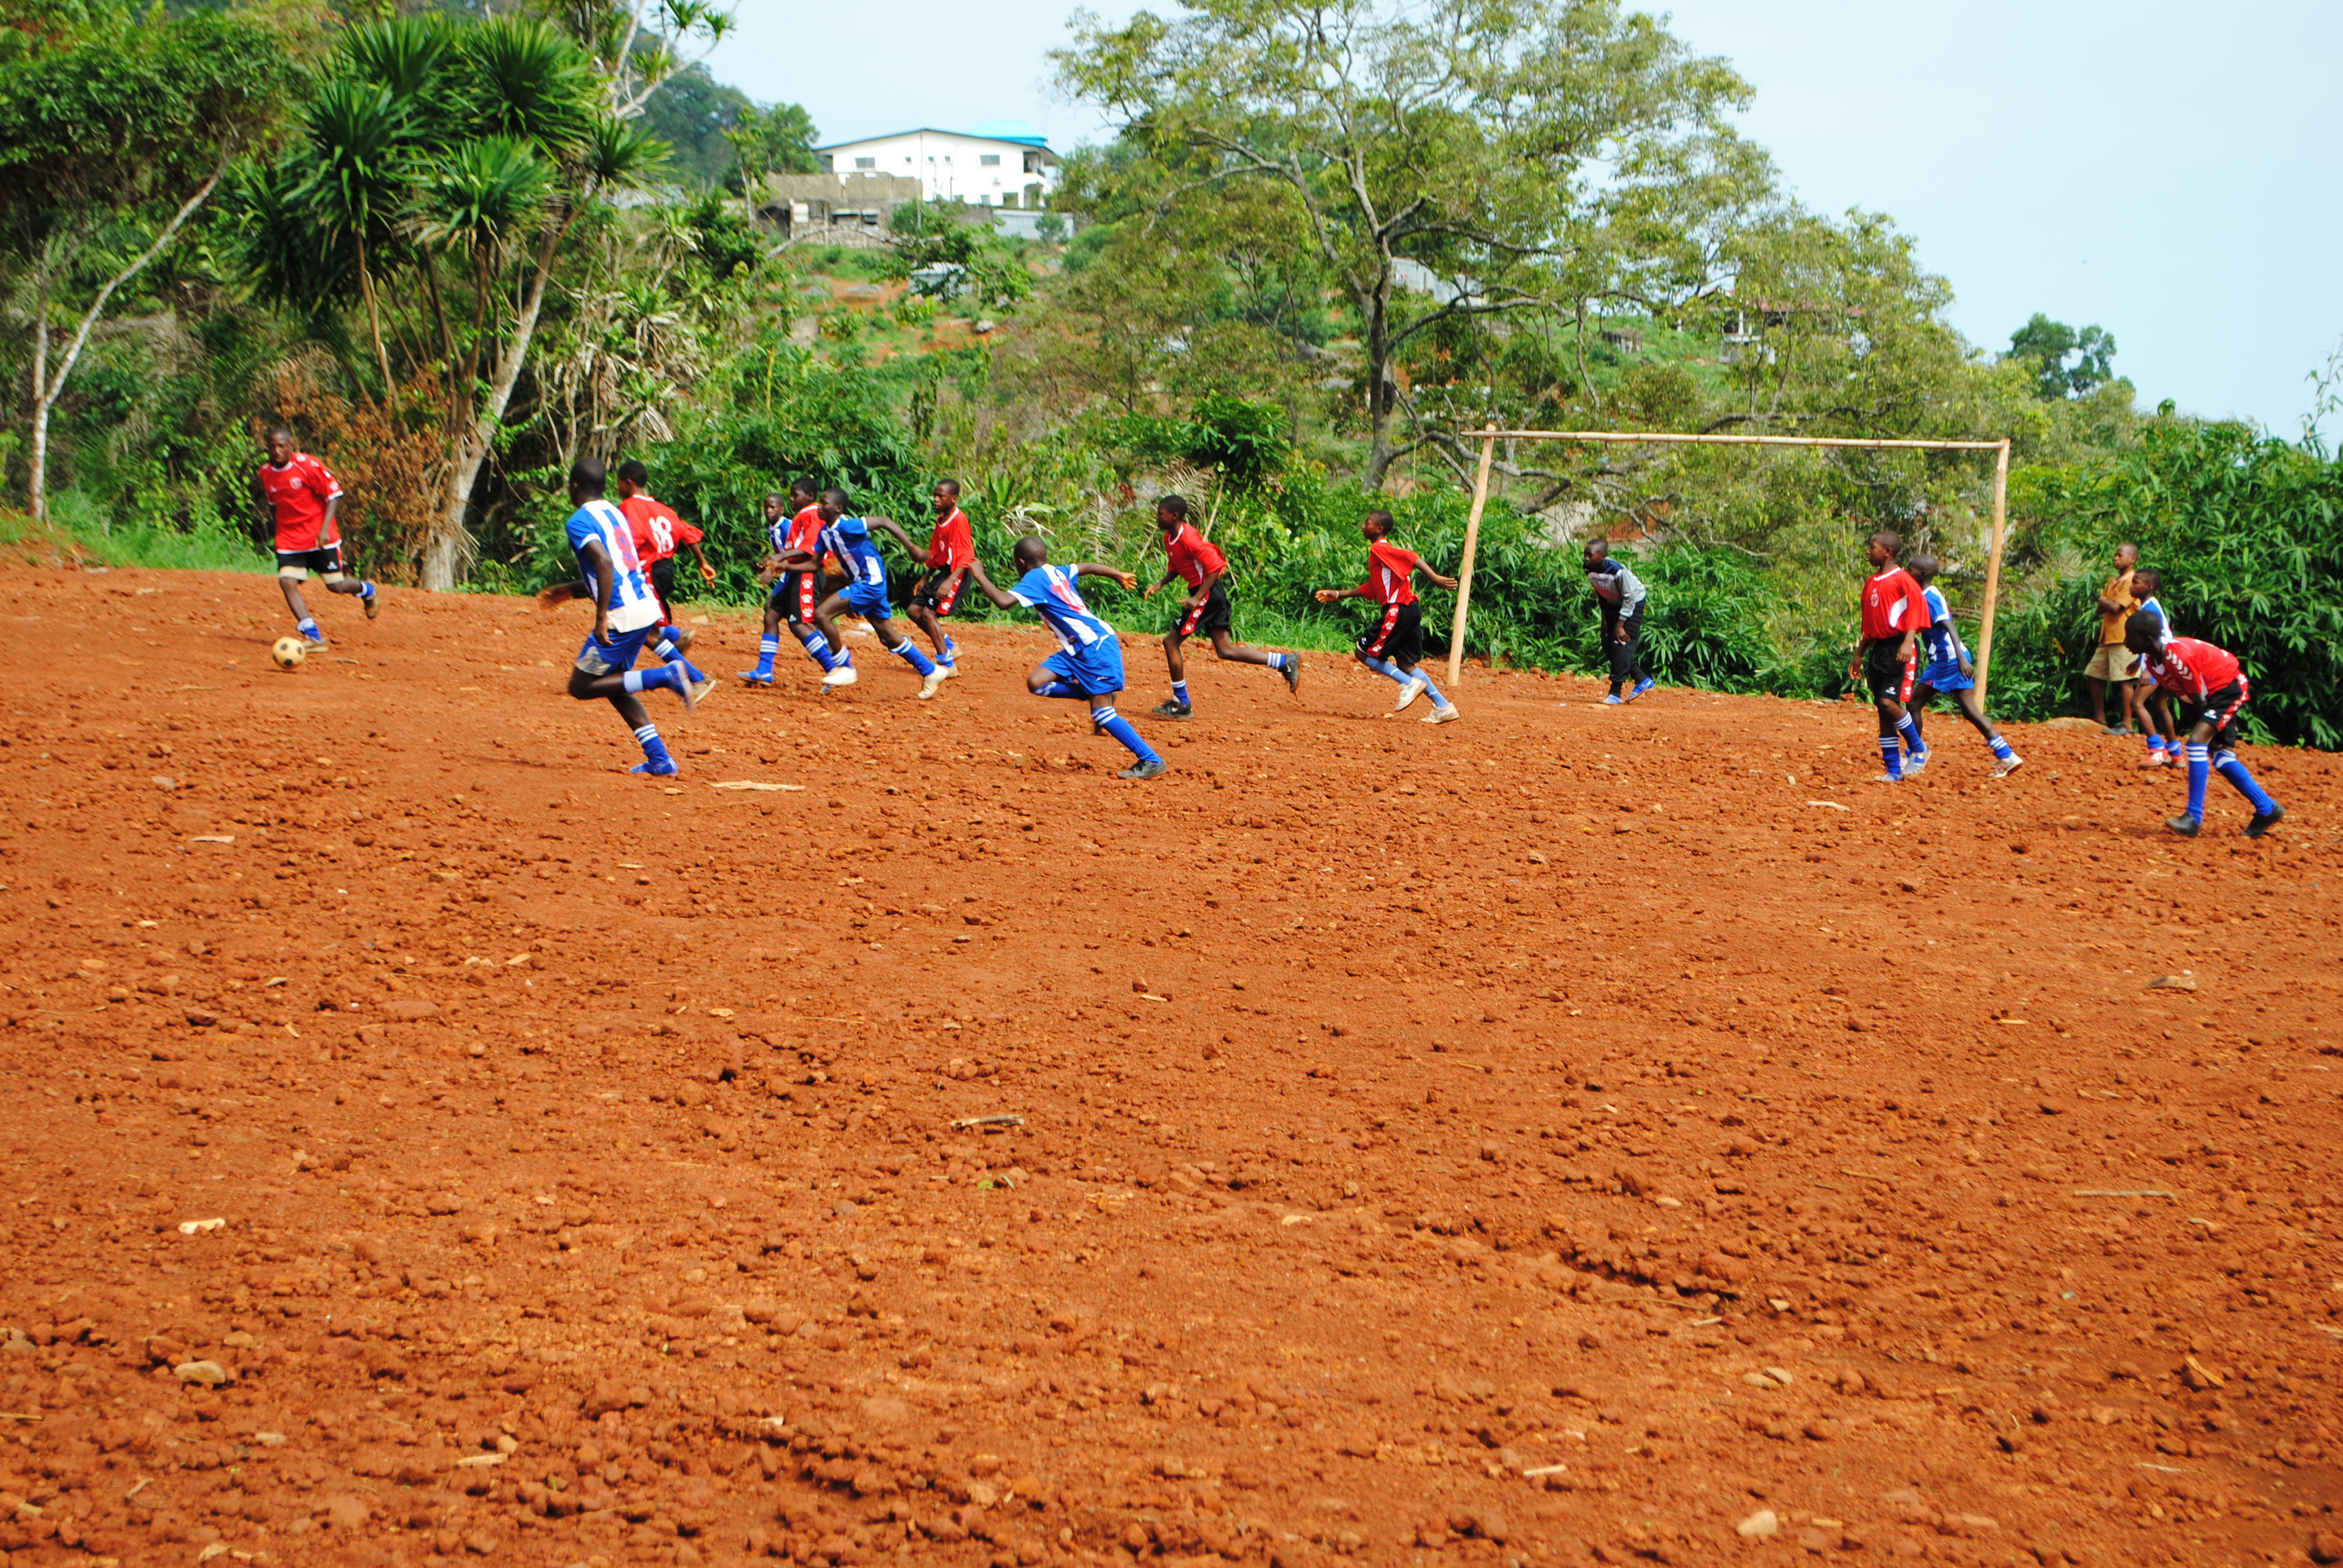 May 2012 - Action4schools team visited REC Primary and played a friendly match in the rugged field. 